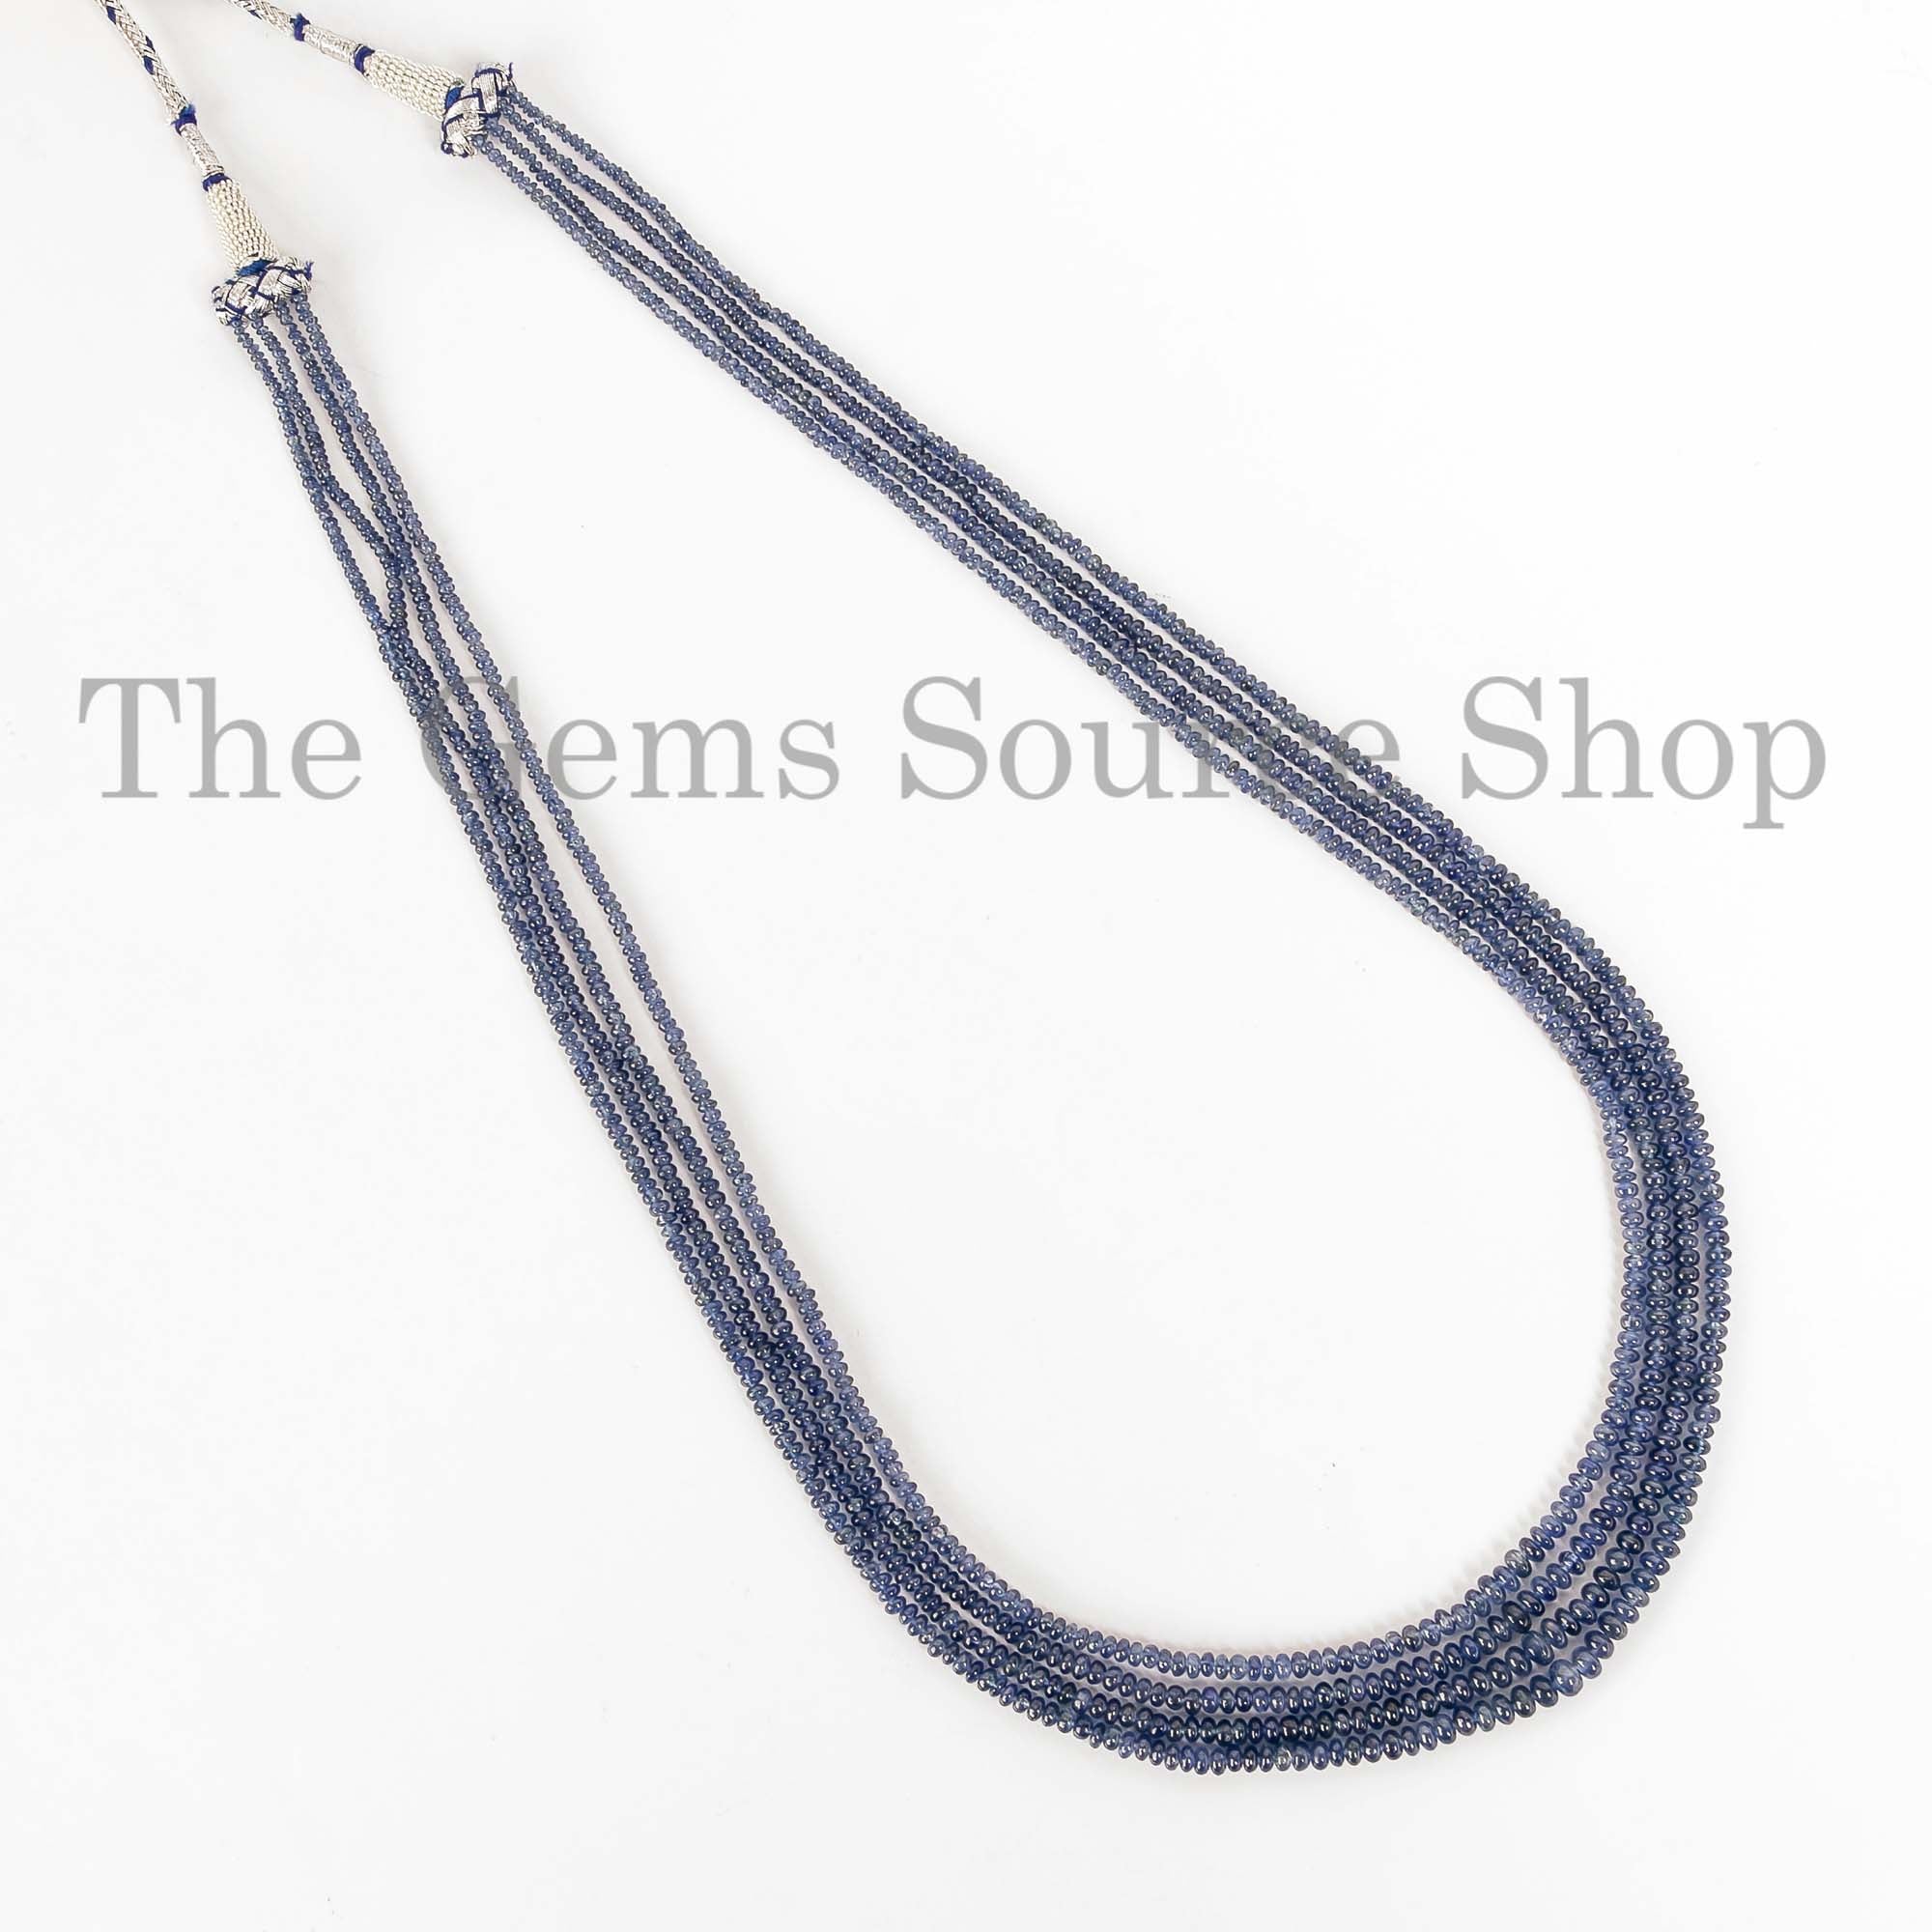 Natural Burmese Blue Sapphire Beads Necklace Smooth Rondelle Beads Necklace, Gemstone Jewelry